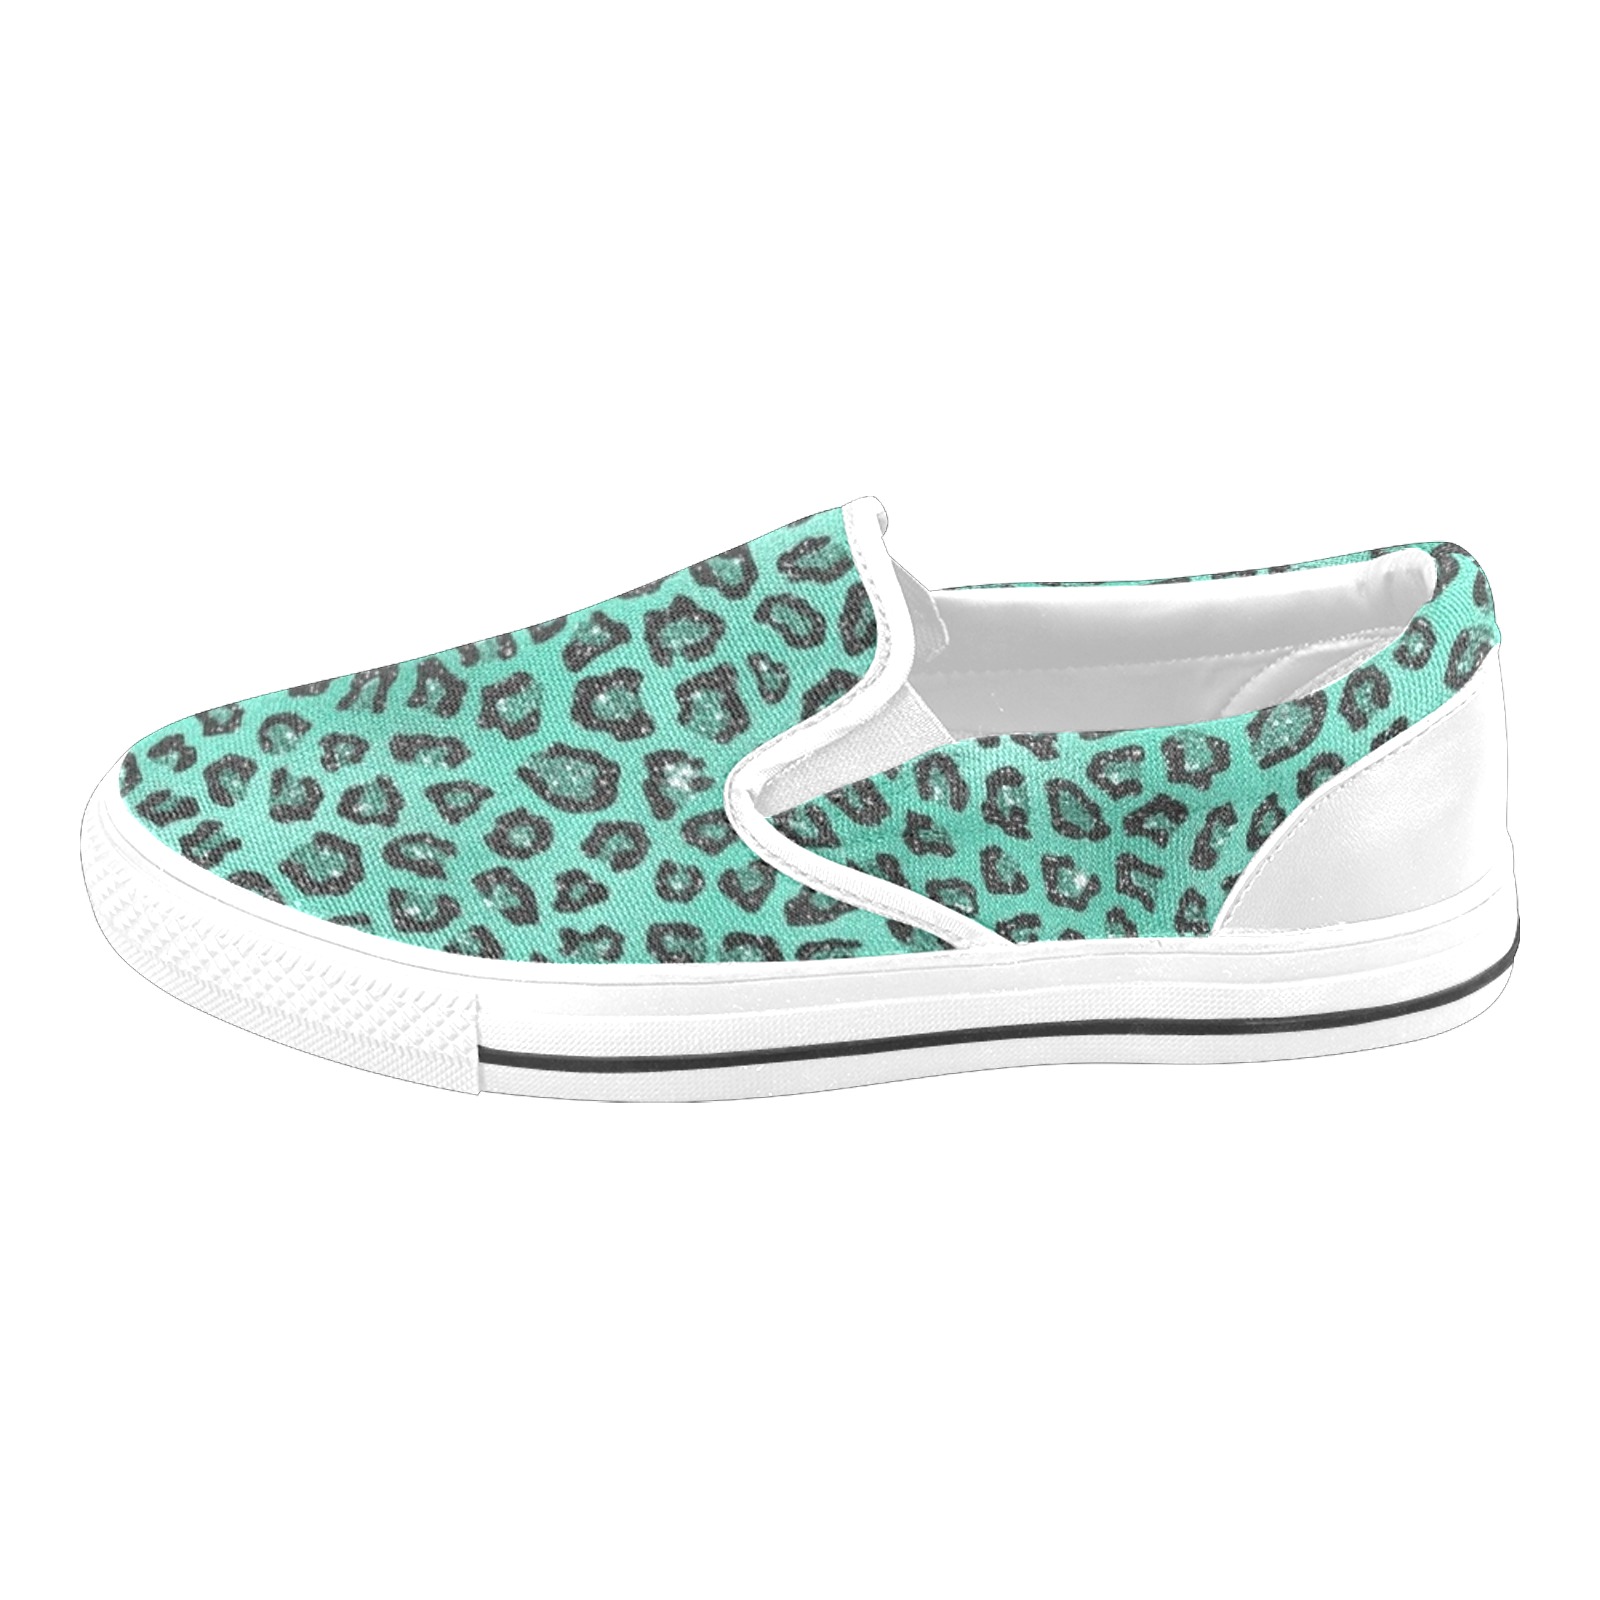 Mens Slip On Shoes Black and Teal Glam =2 Women's Fashion Art Casual ...